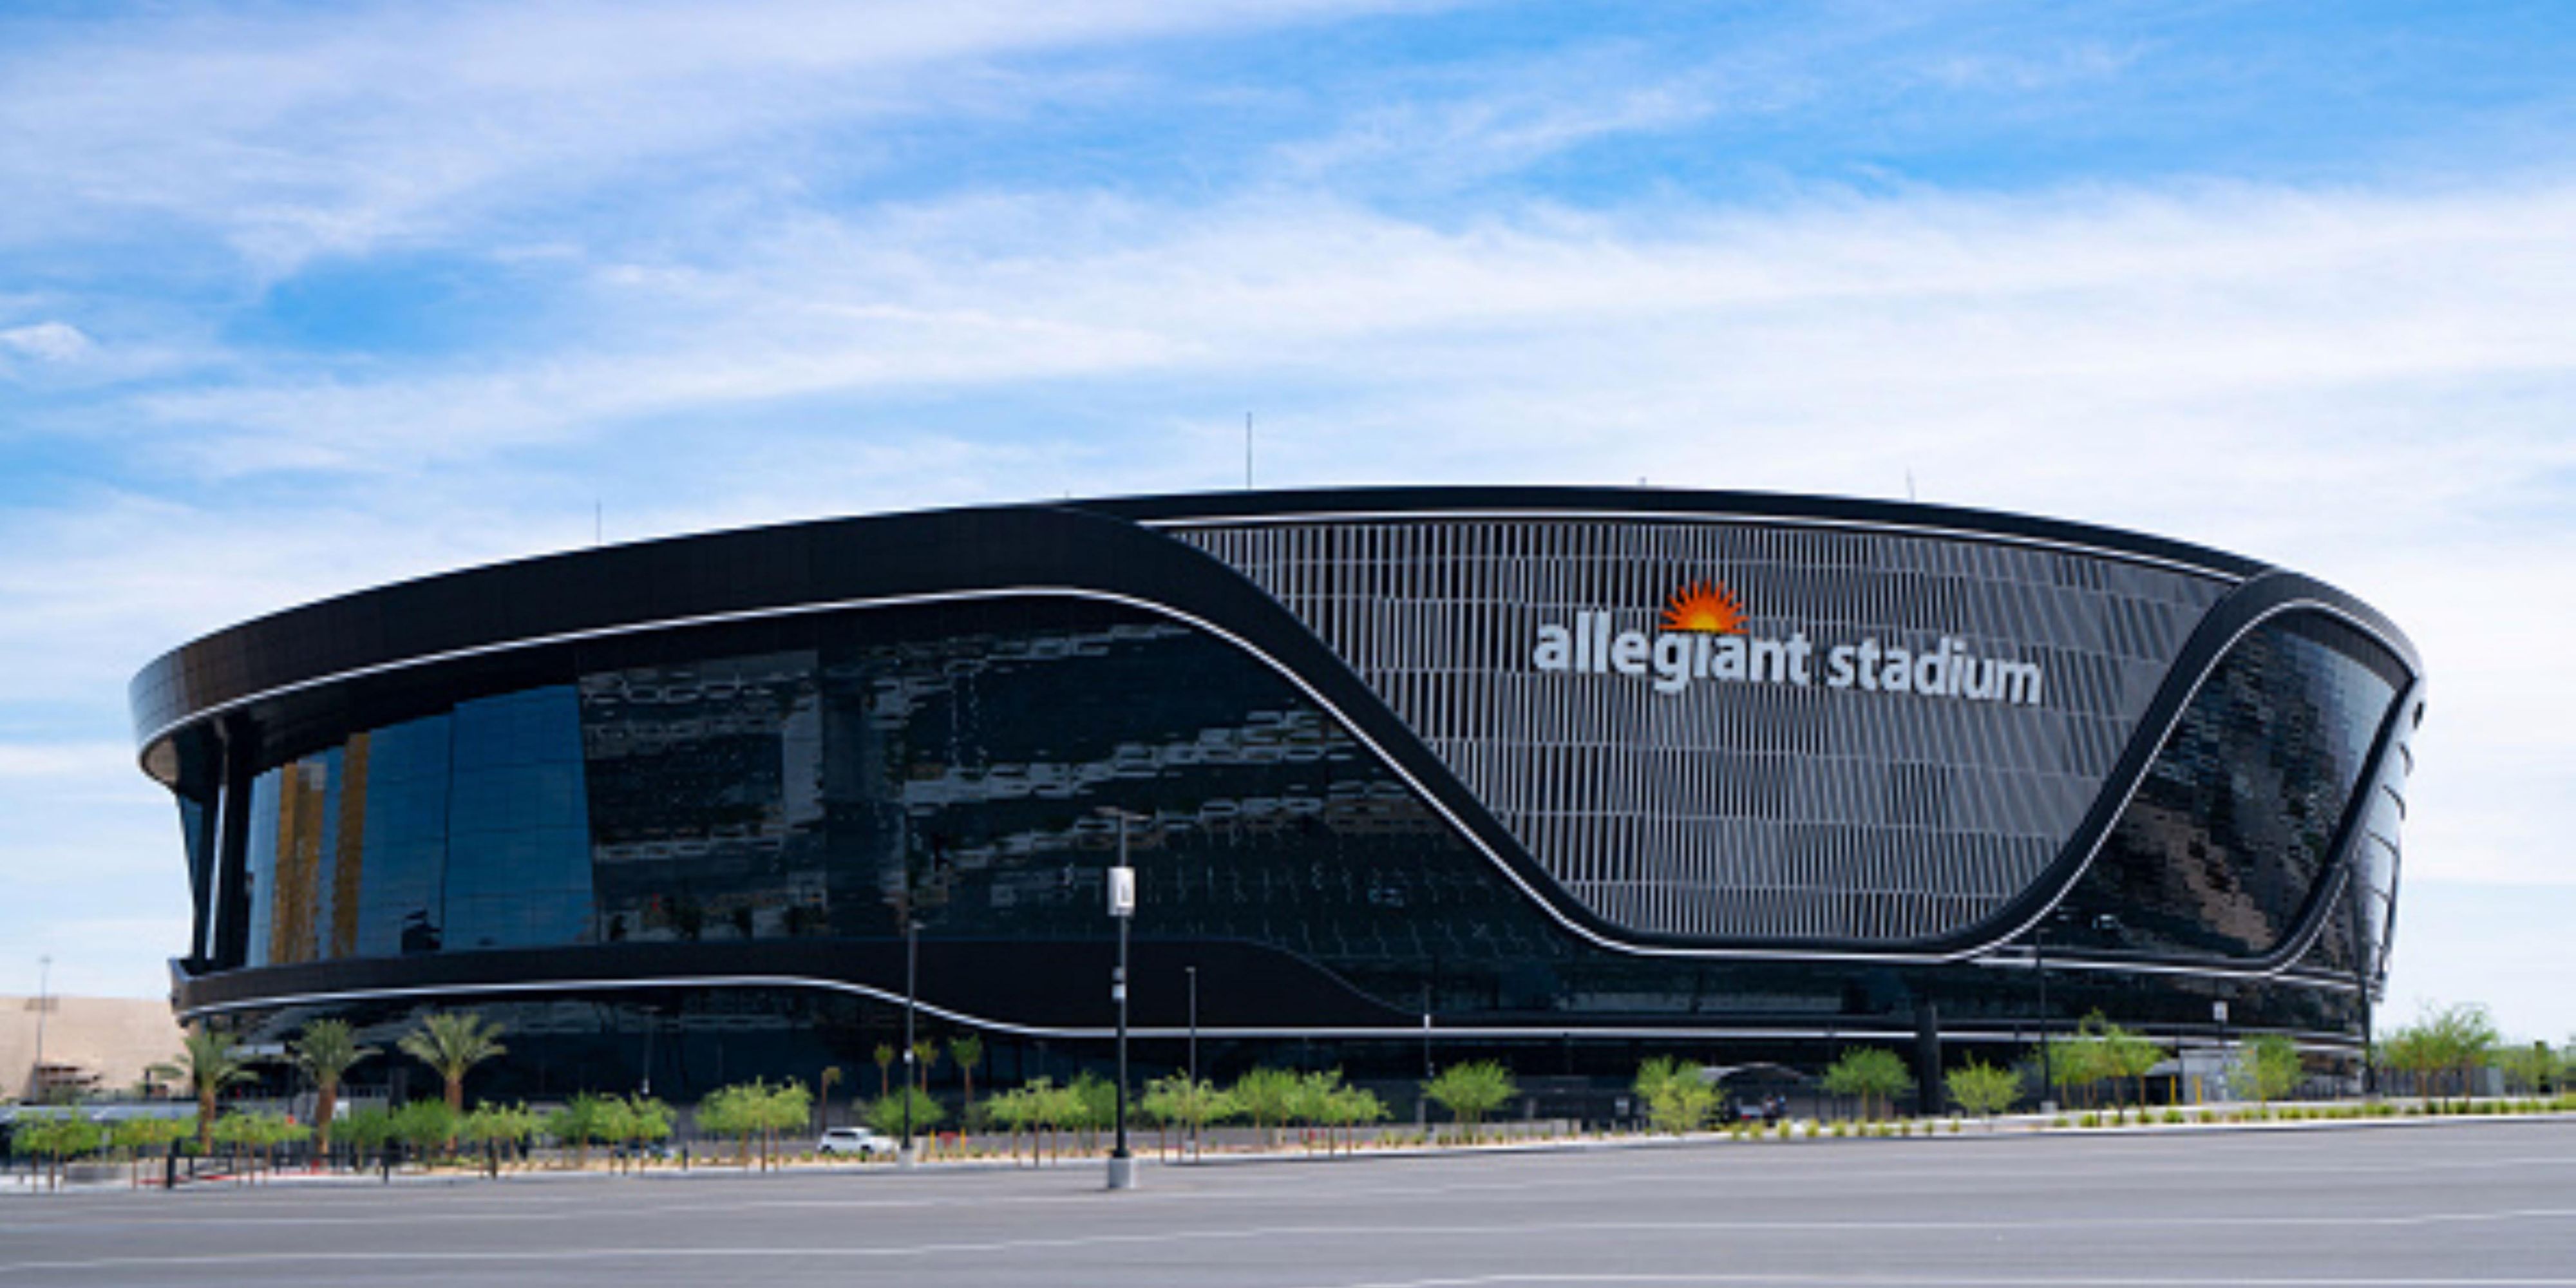 The all-new Allegiant Stadium is home to the NFL's Las Vegas Raiders and UNLV Rebels Football. The Allegiant Stadium is also offering some of the best concerts in town! The Holiday Inn Express Henderson is only 10 miles away.